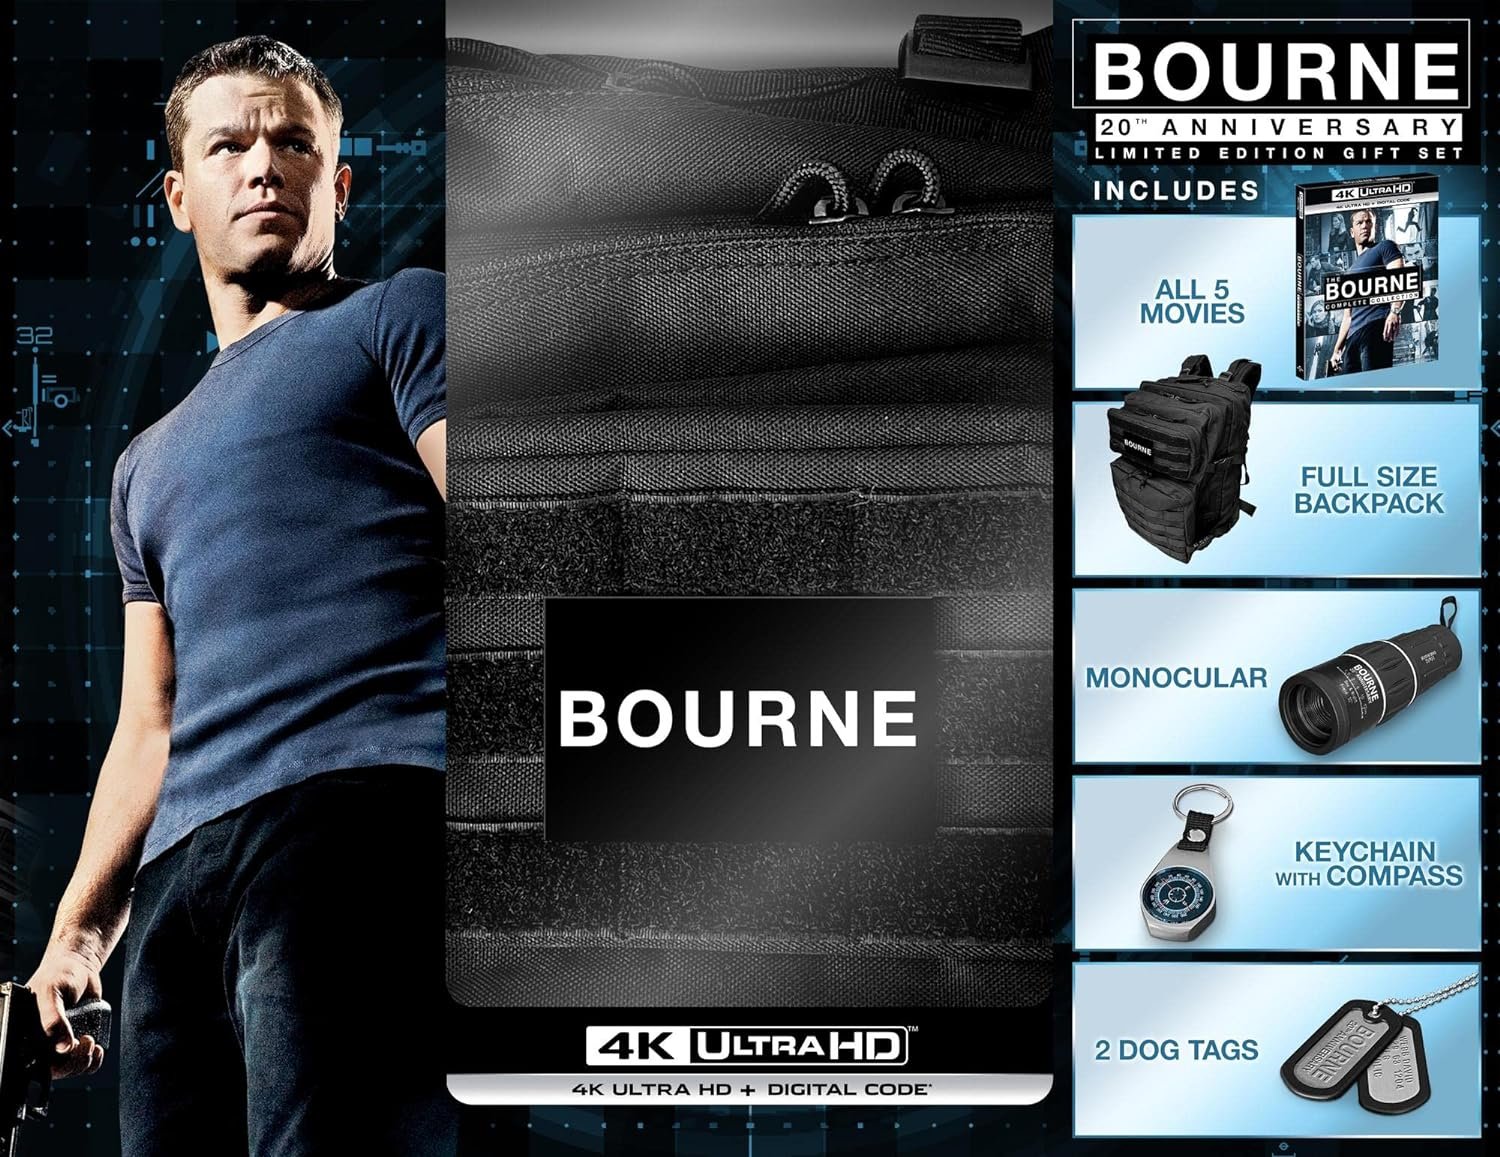 The Bourne Complete Collection - 20th Anniversary Limited Edition Gift Set (4K Ultra HD) [UHD] - image 2 of 4